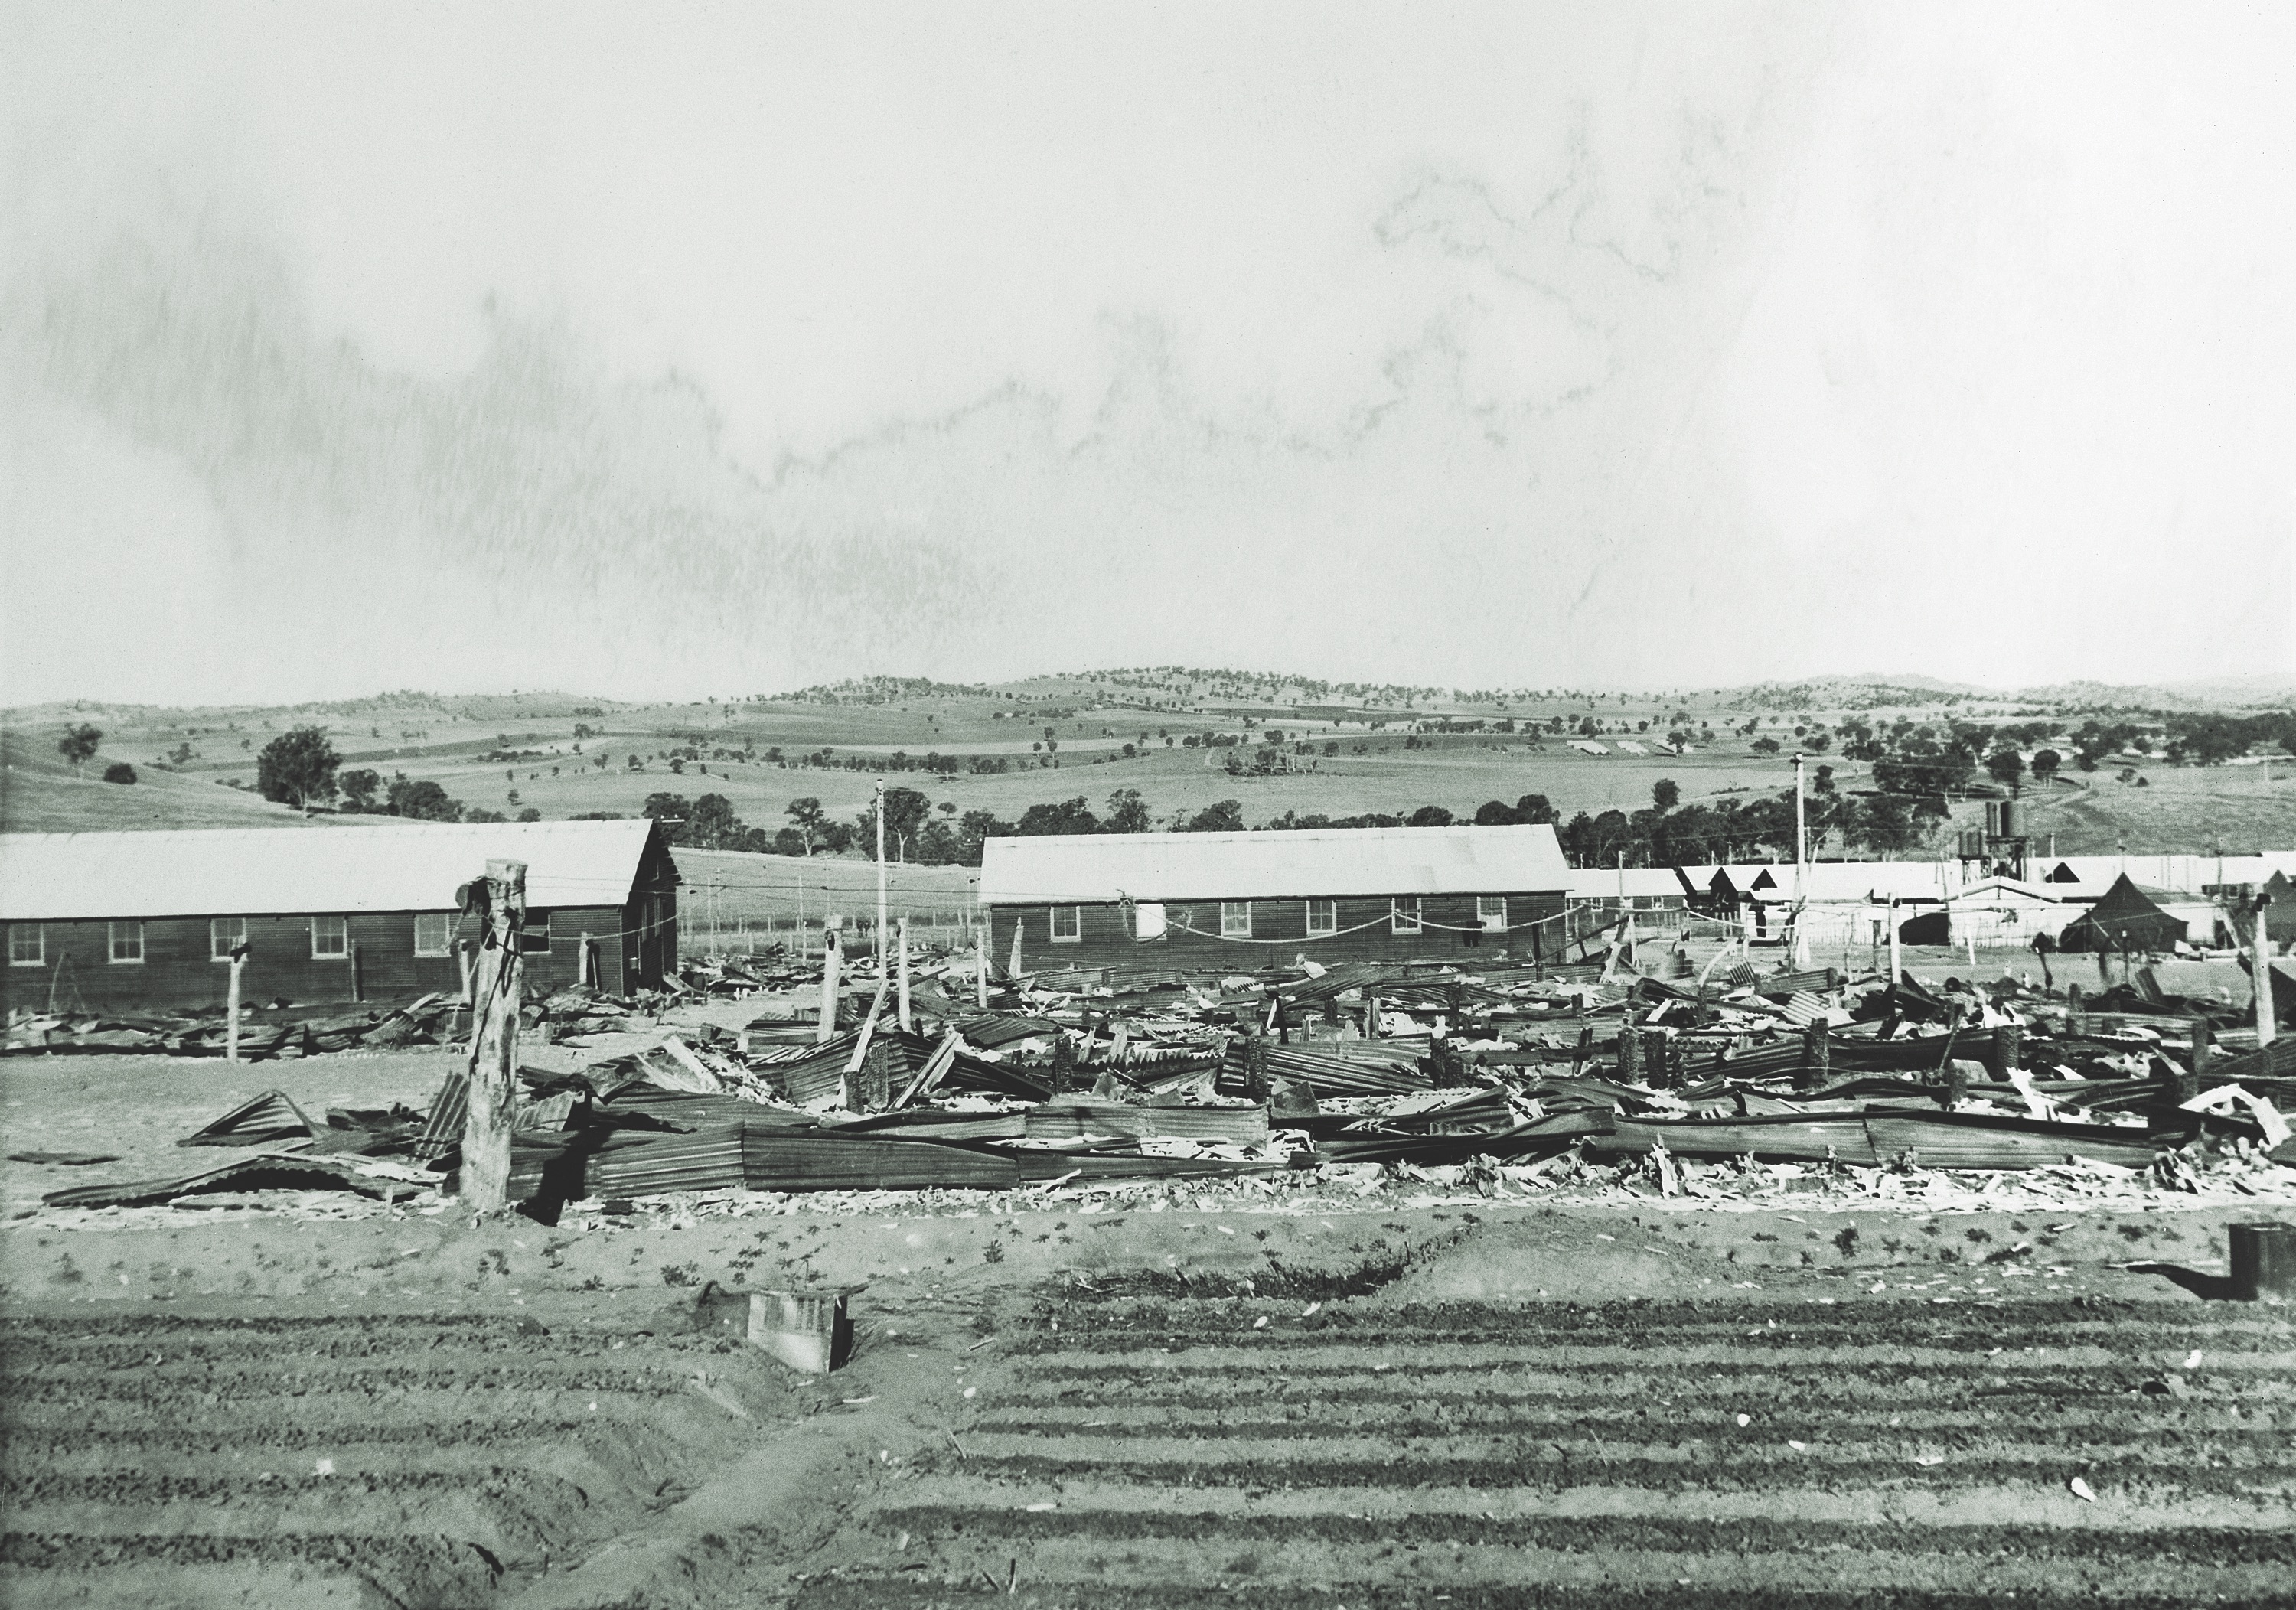 Several of the 18 sleeping huts intentionally burned by the POWs in B Compound still smolder the morning after the attempted escape. The prisoners also torched two other buildings within the compound. (Australian War Memorial)